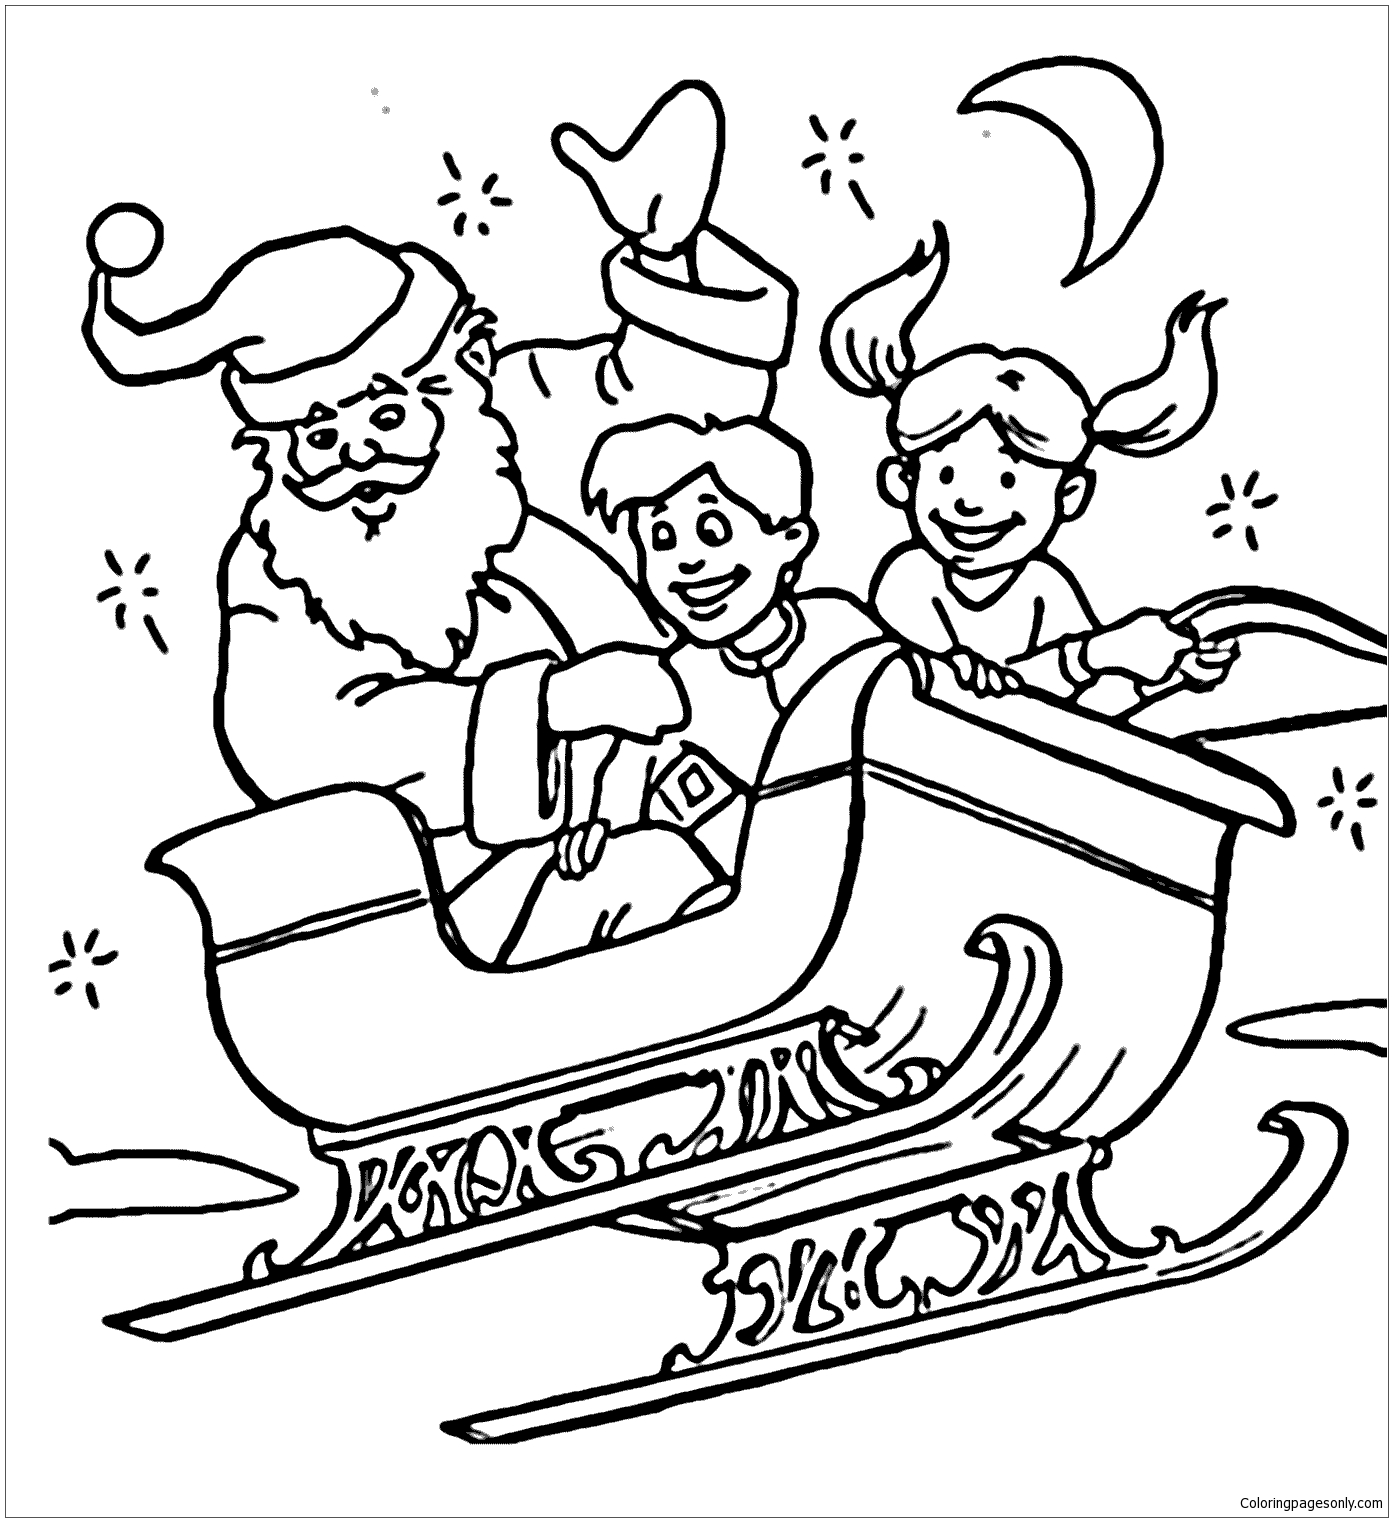 Download Santa Claus And Children Flying in Sleigh Coloring Pages - Holidays Coloring Pages - Free ...